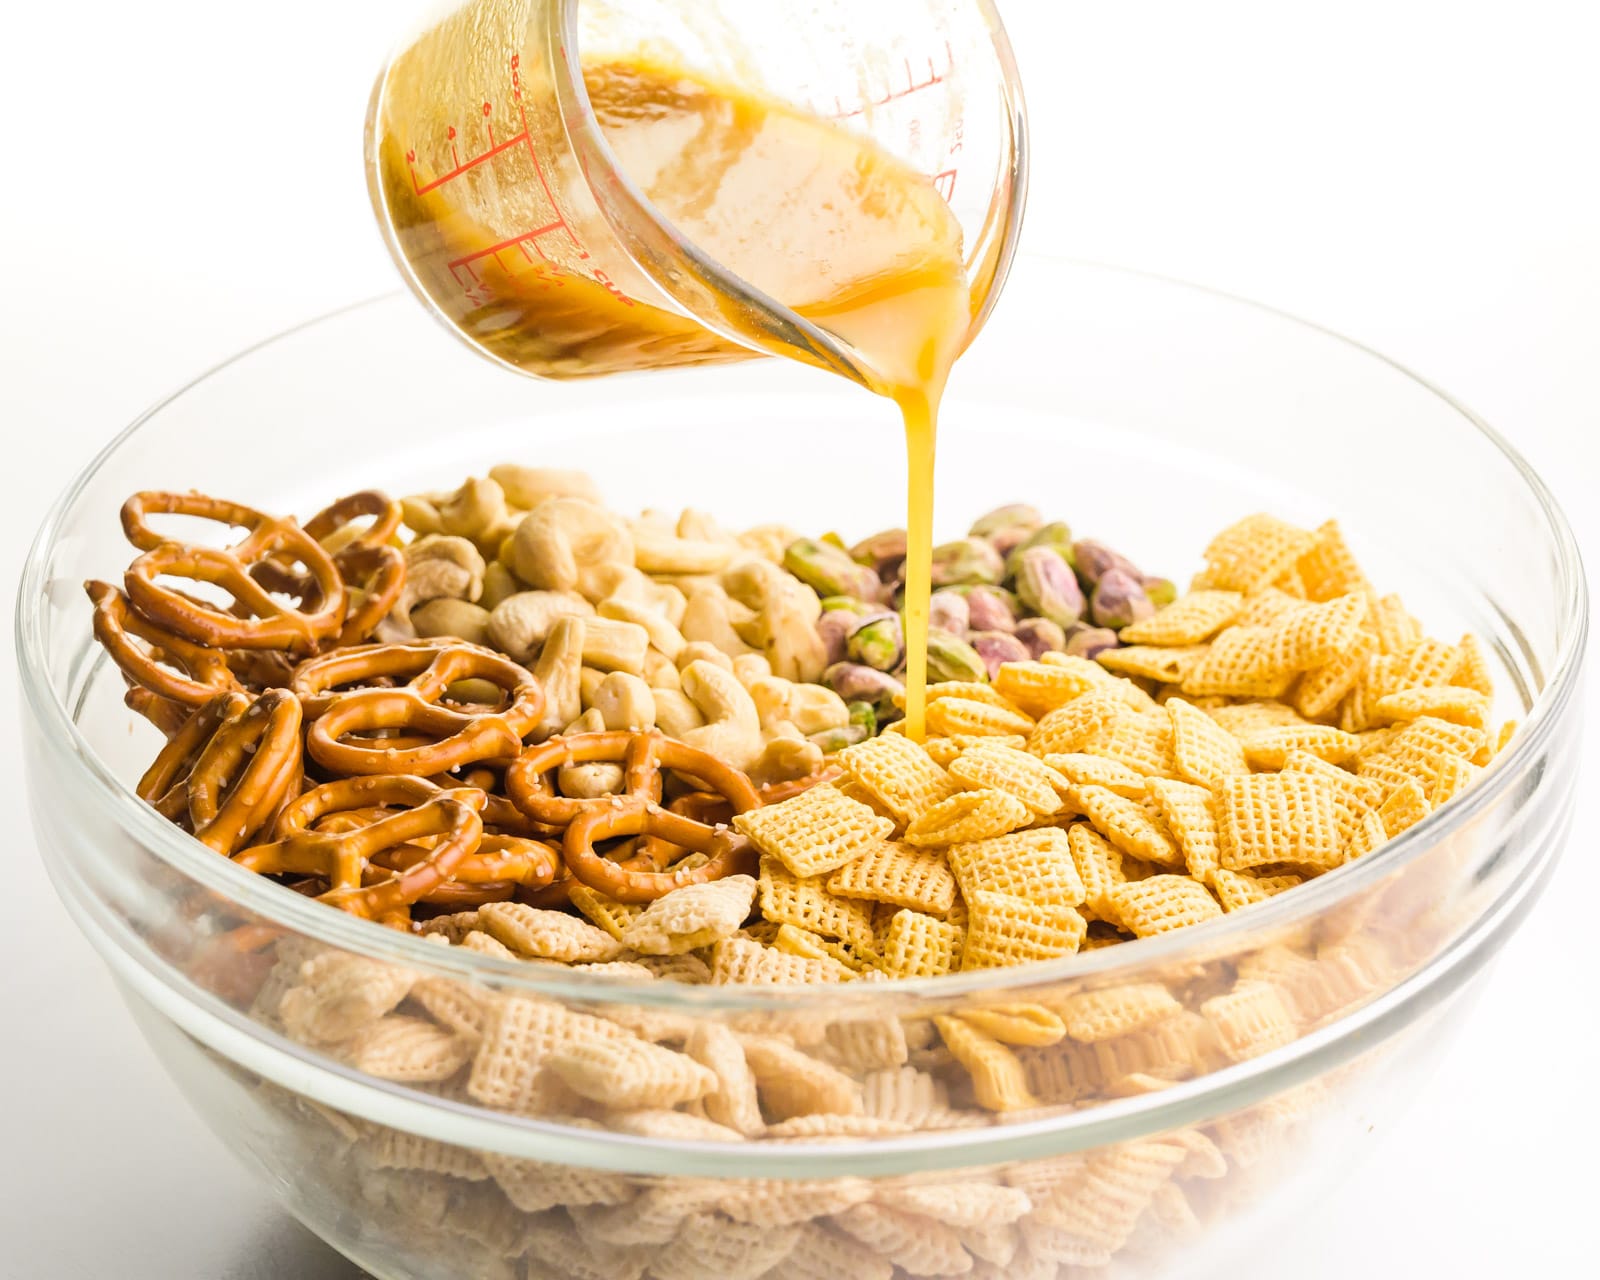 A butter mixture is being poured over snack mix cereal, pretzels, and nuts in a large bowl.